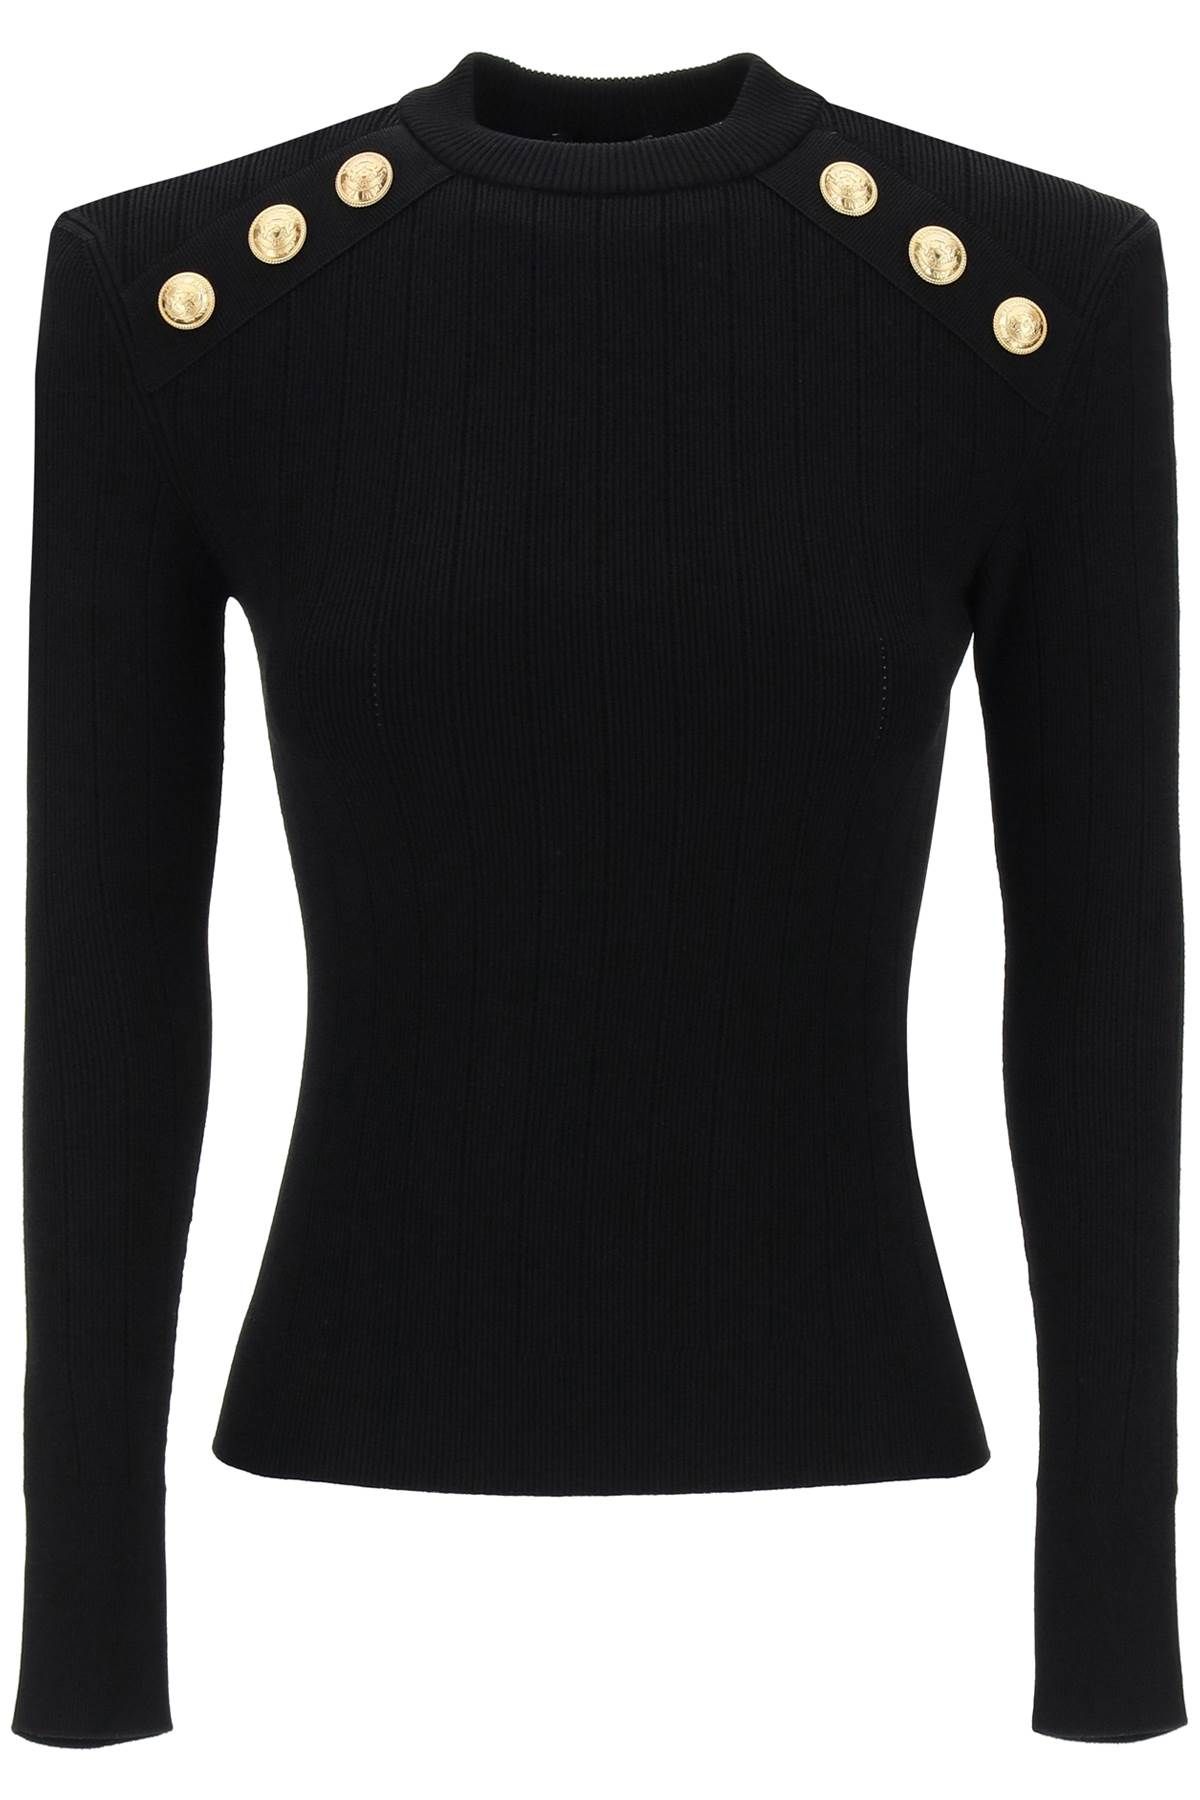 Balmain Crew-neck Sweater With Buttons In Black